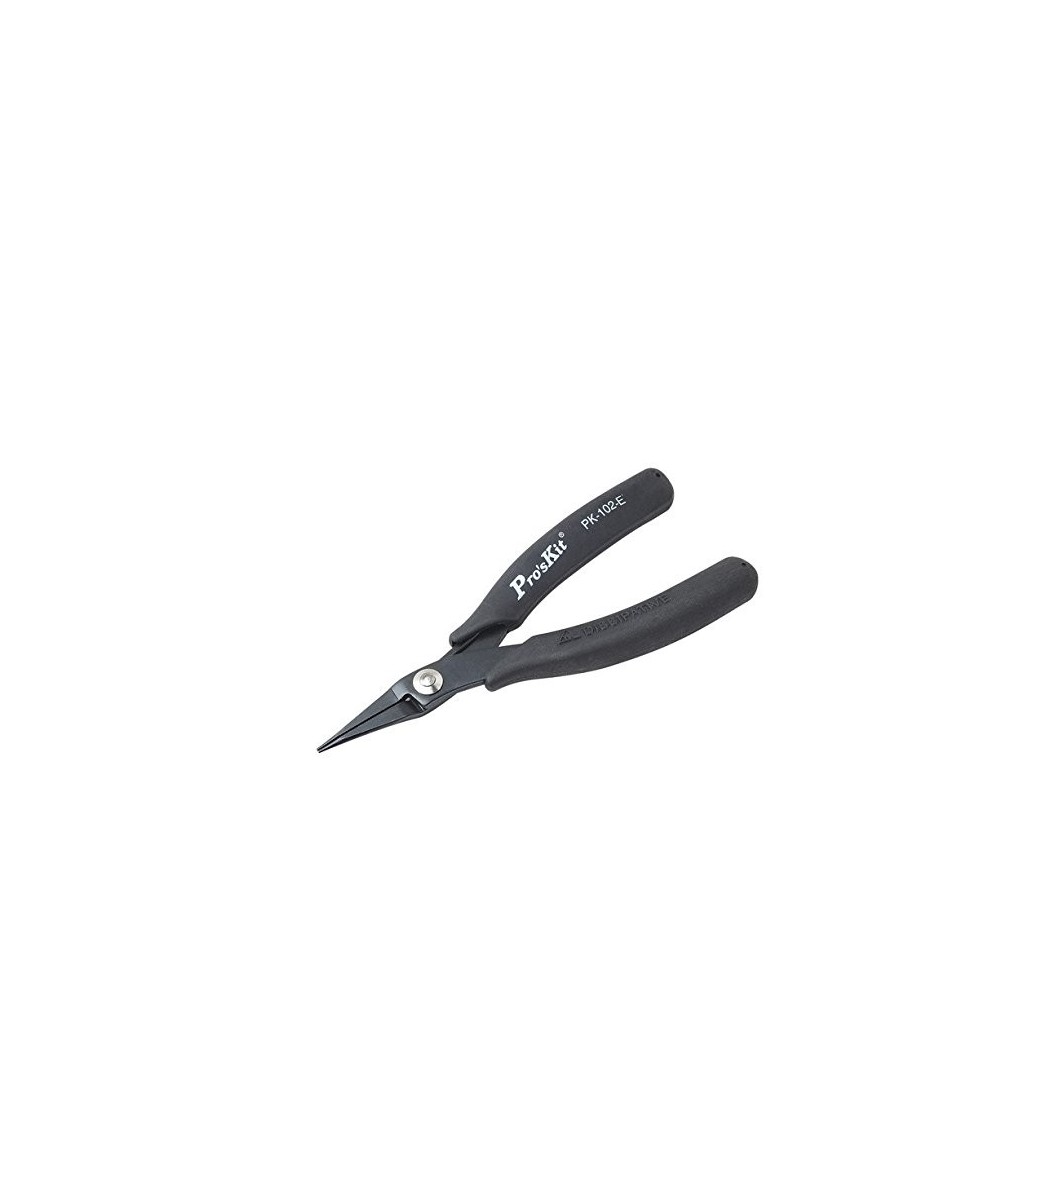 STANDARD NEEDLE-NOSE PLIERS 150mm PA-102